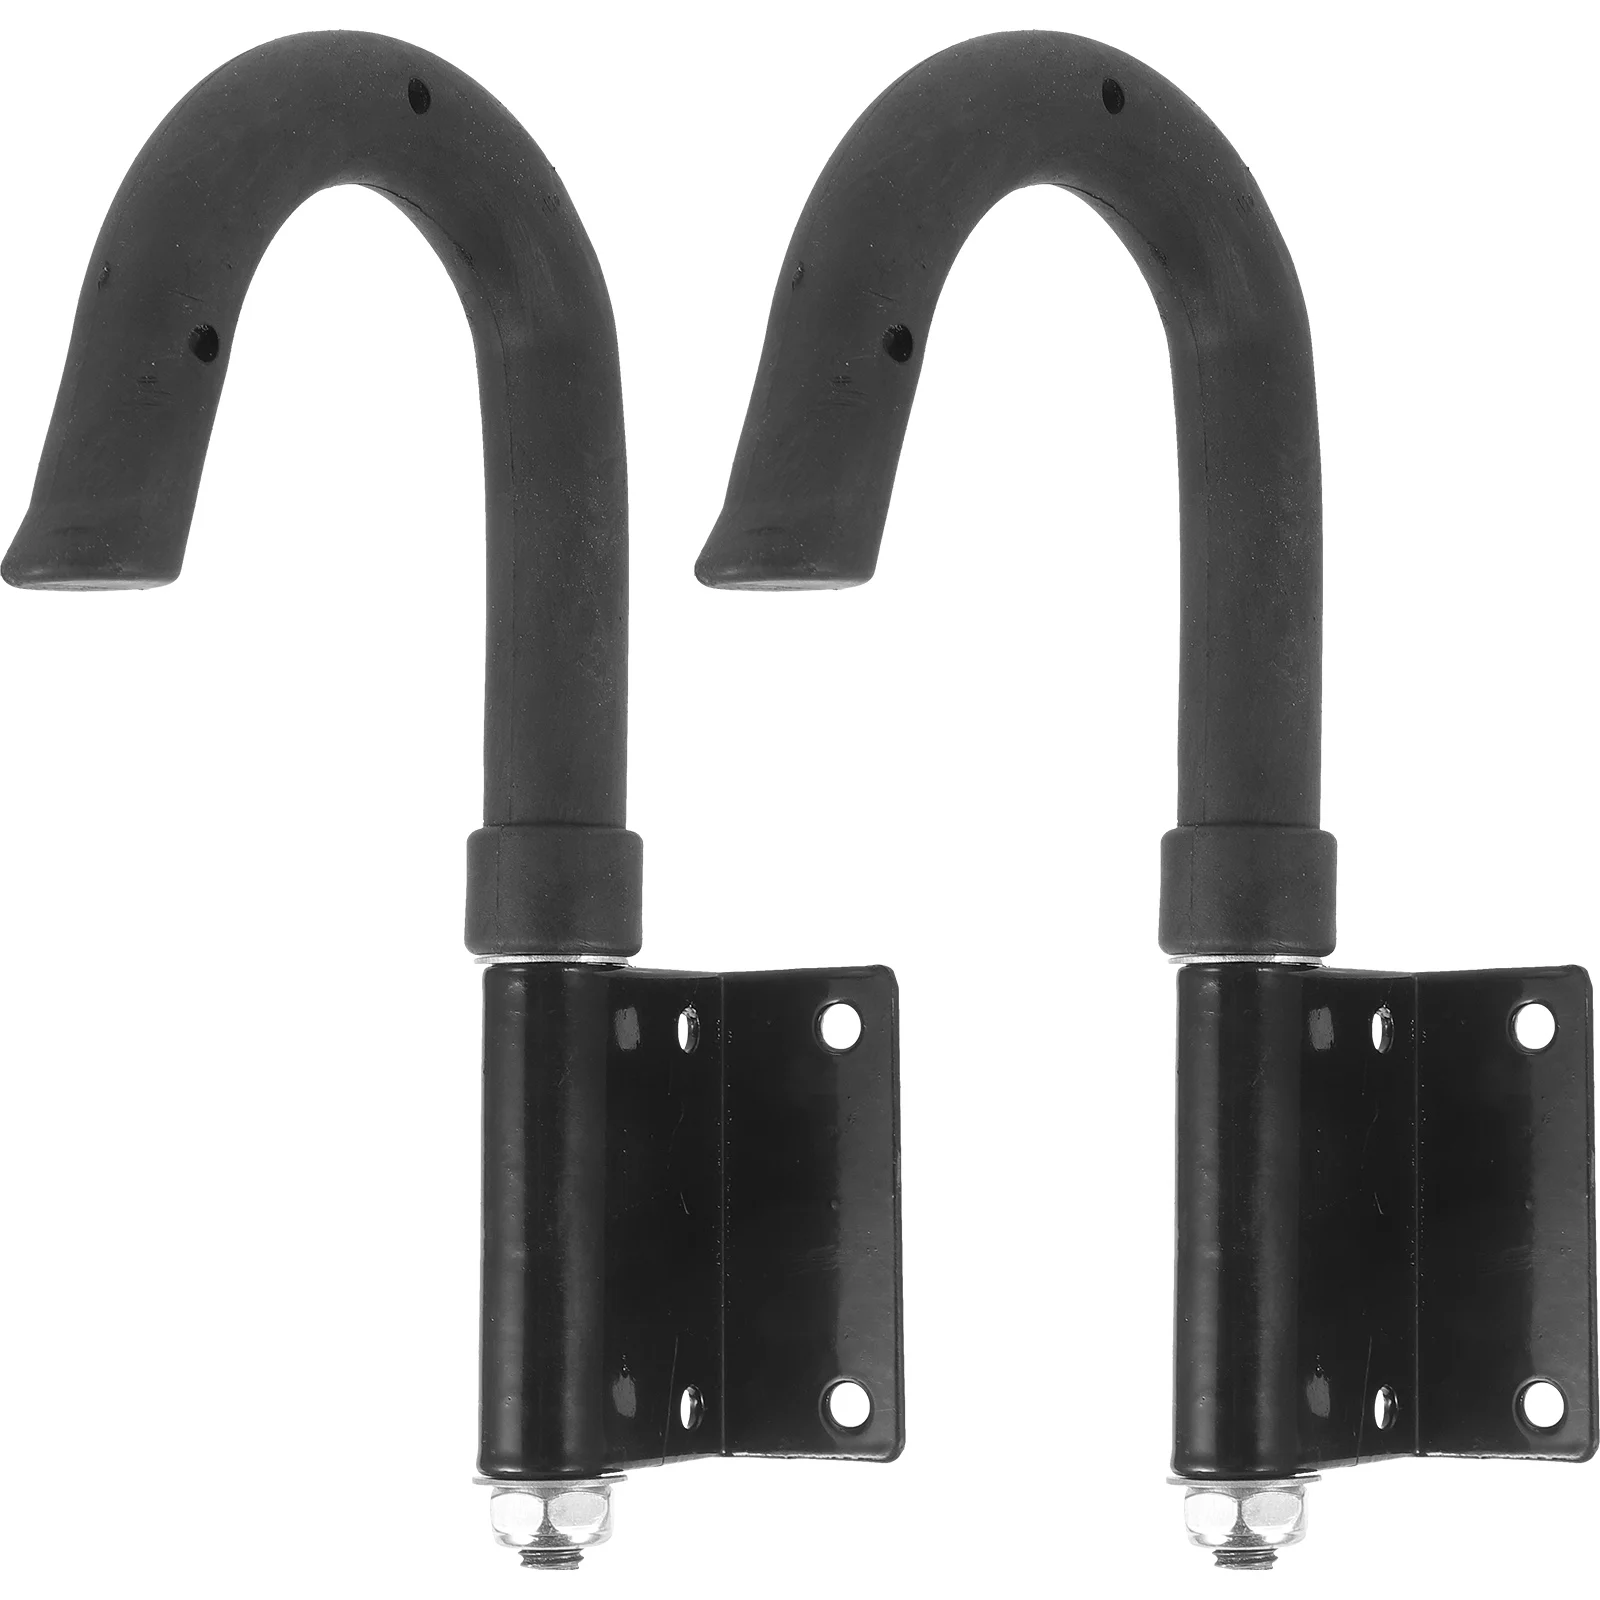 

2 Pcs Hook Ladder Roof Stairs Accessories Hooks Rubber Fence Heavy Duty Extension Stabilizer